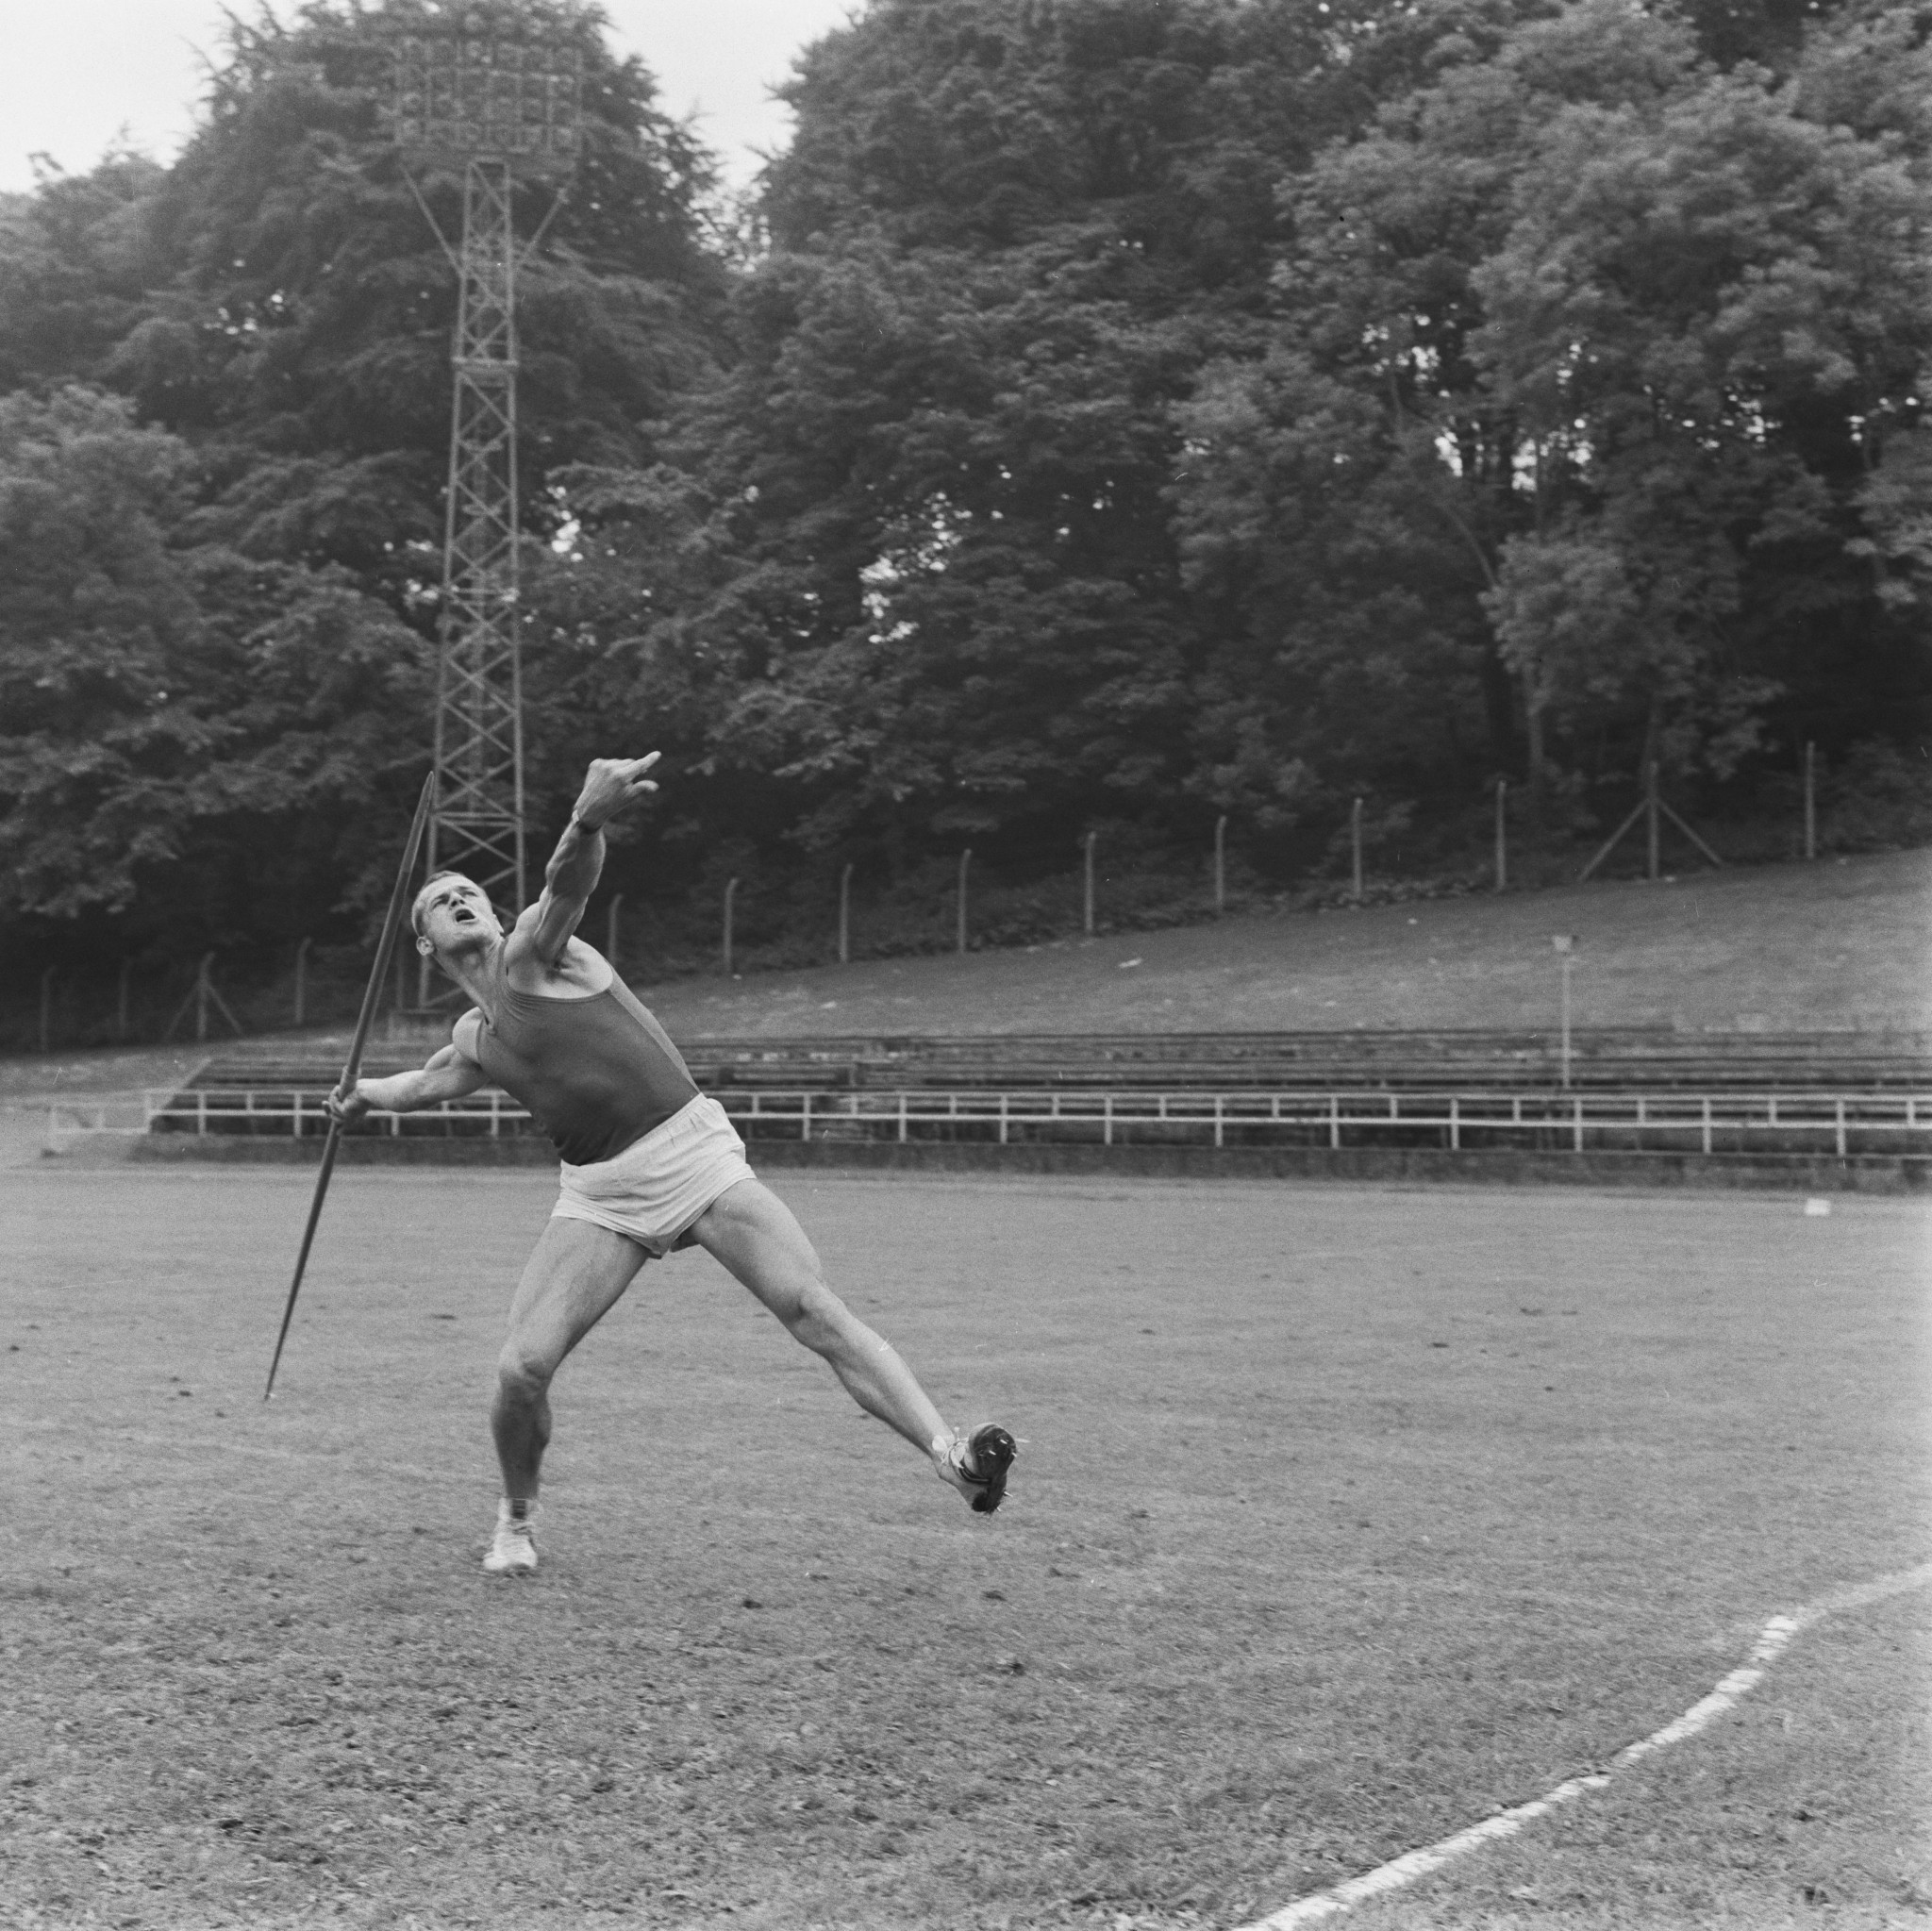 Janis Lusis is regarded as one of the best javelin throwers of all time ©Getty Images